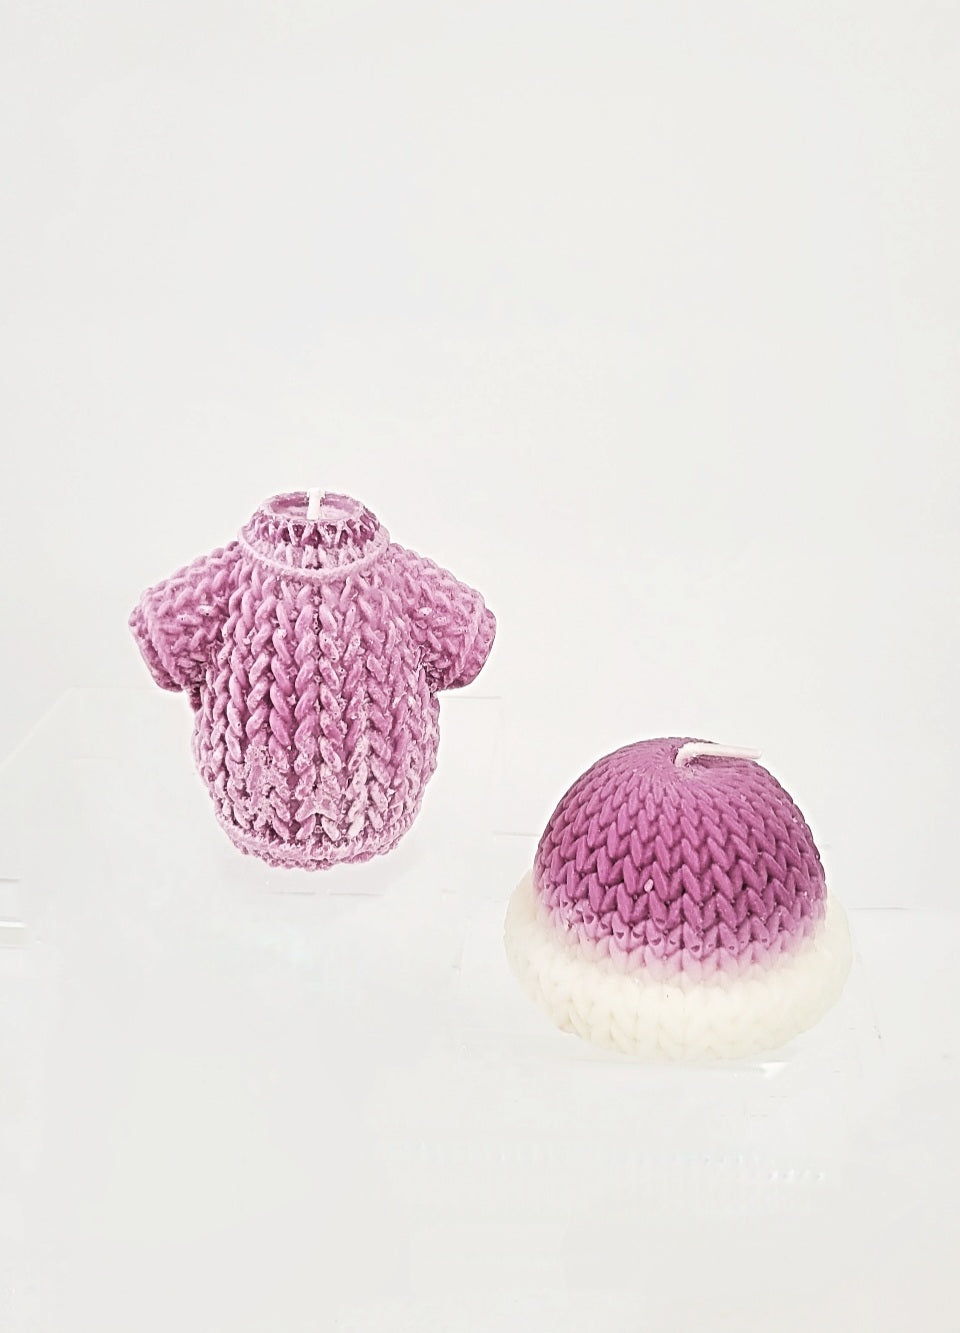 3D Knitted